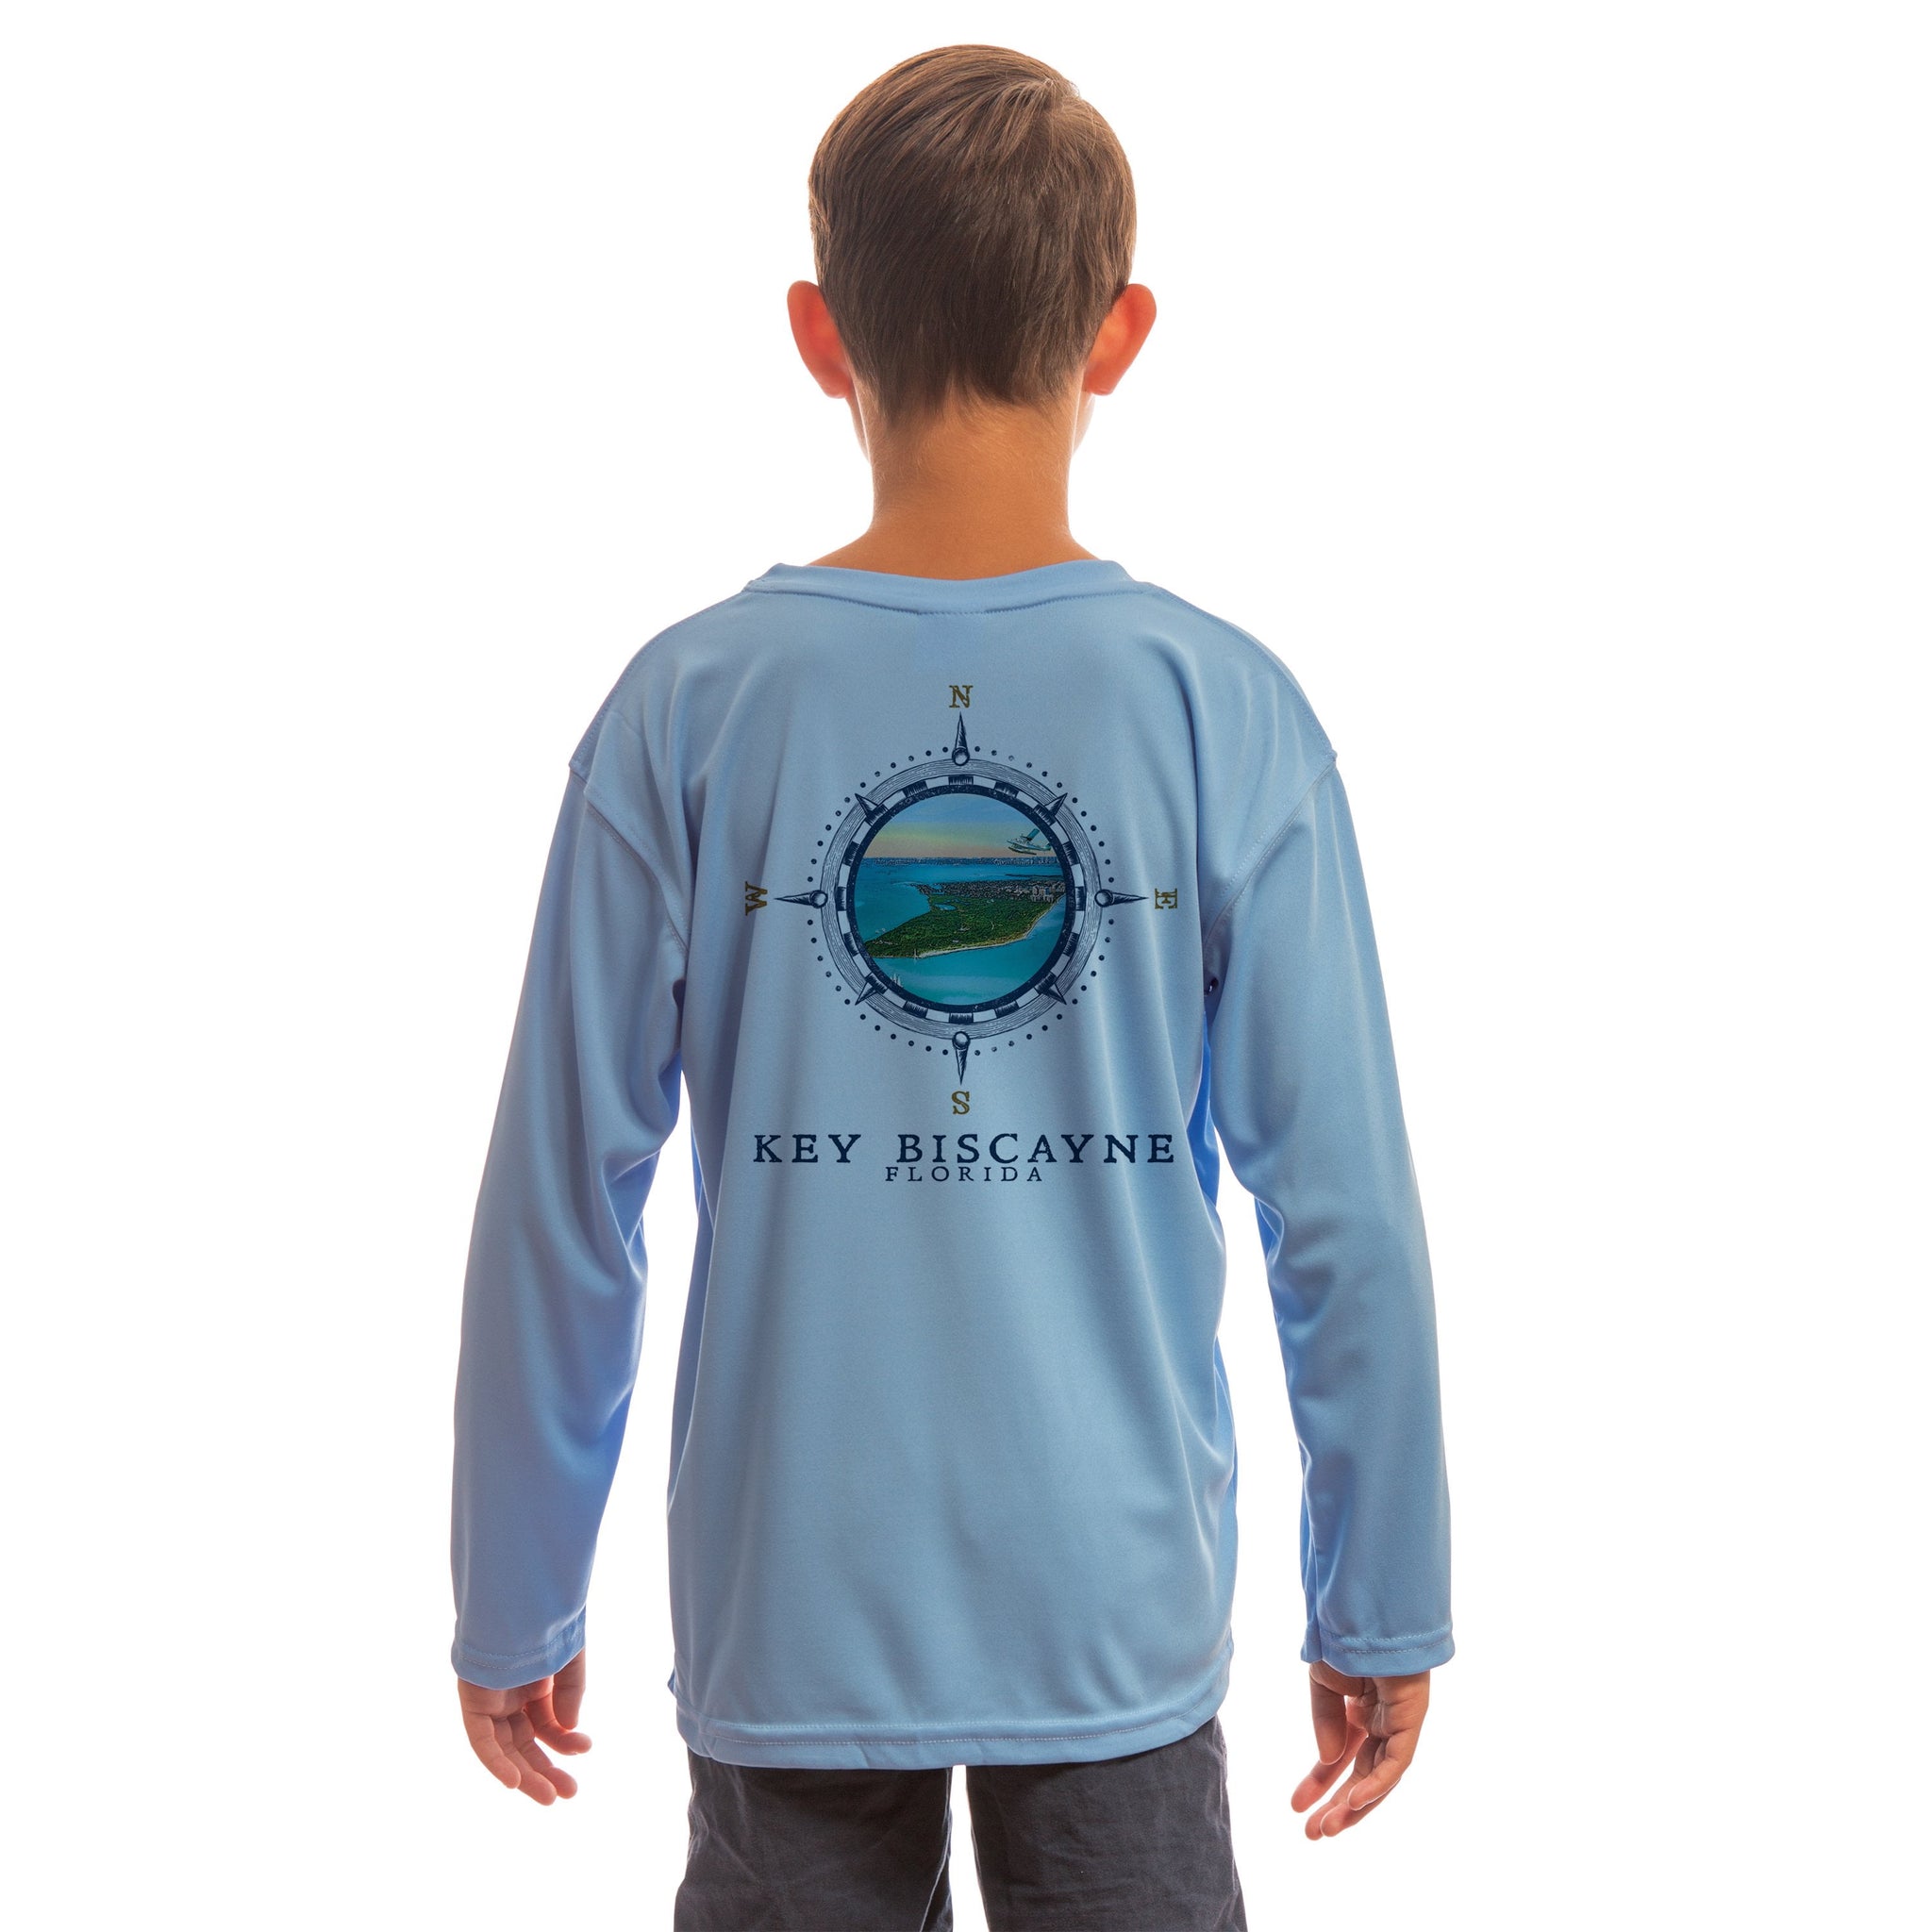 Compass Vintage Key Biscayne Youth UPF 50 Long Sleeve